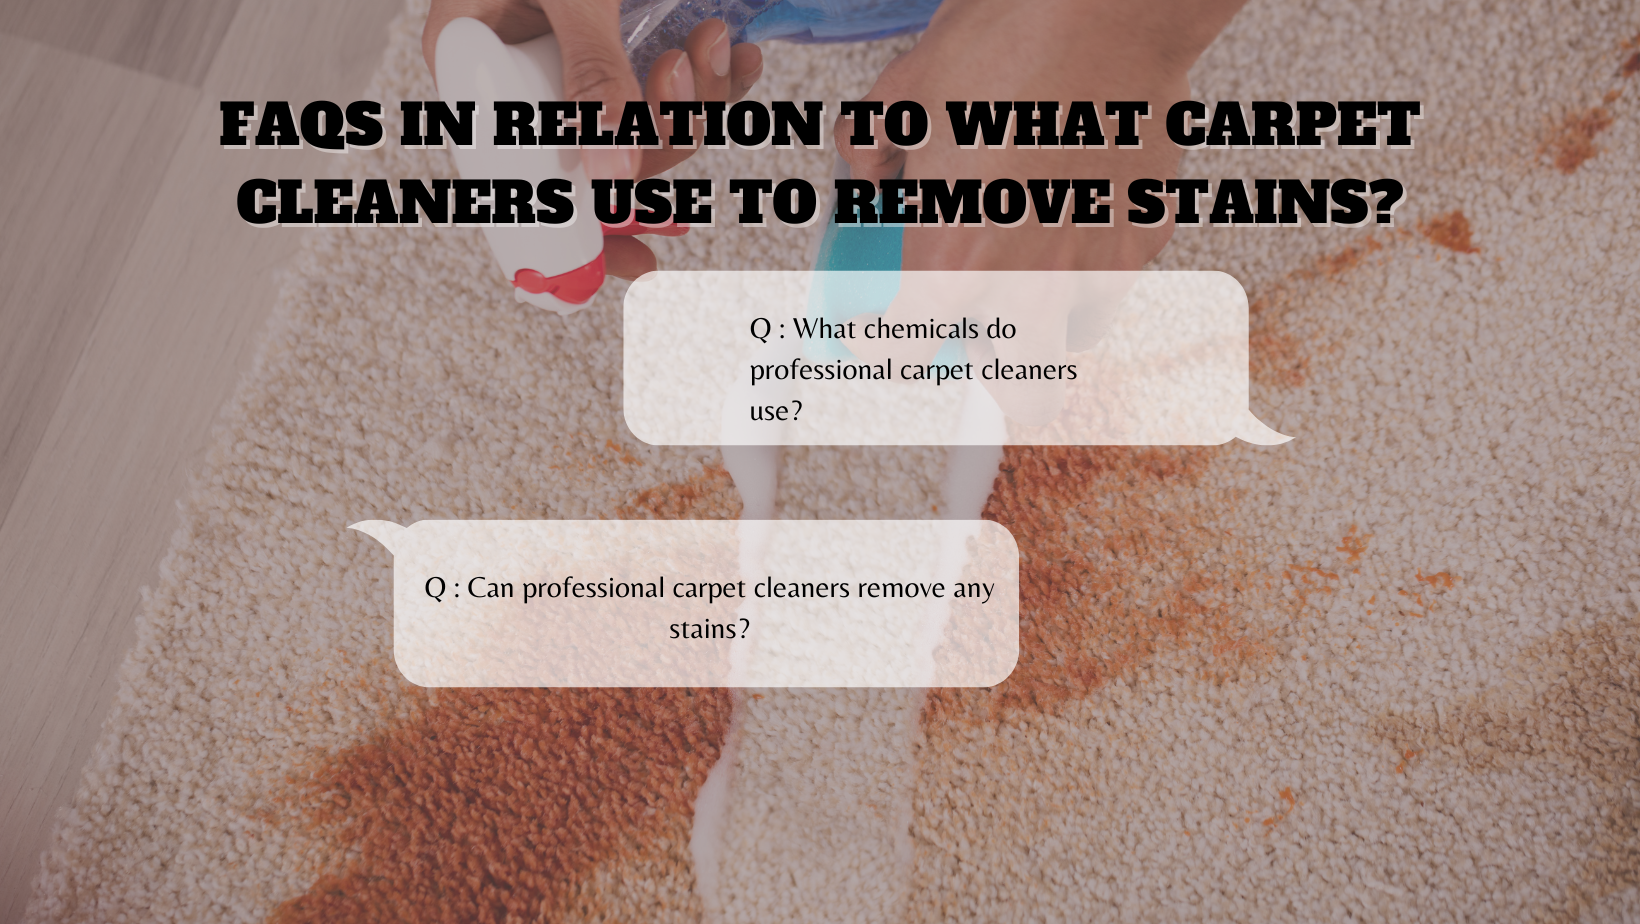 What Do Professional Carpet Cleaners Use to Remove Stains?